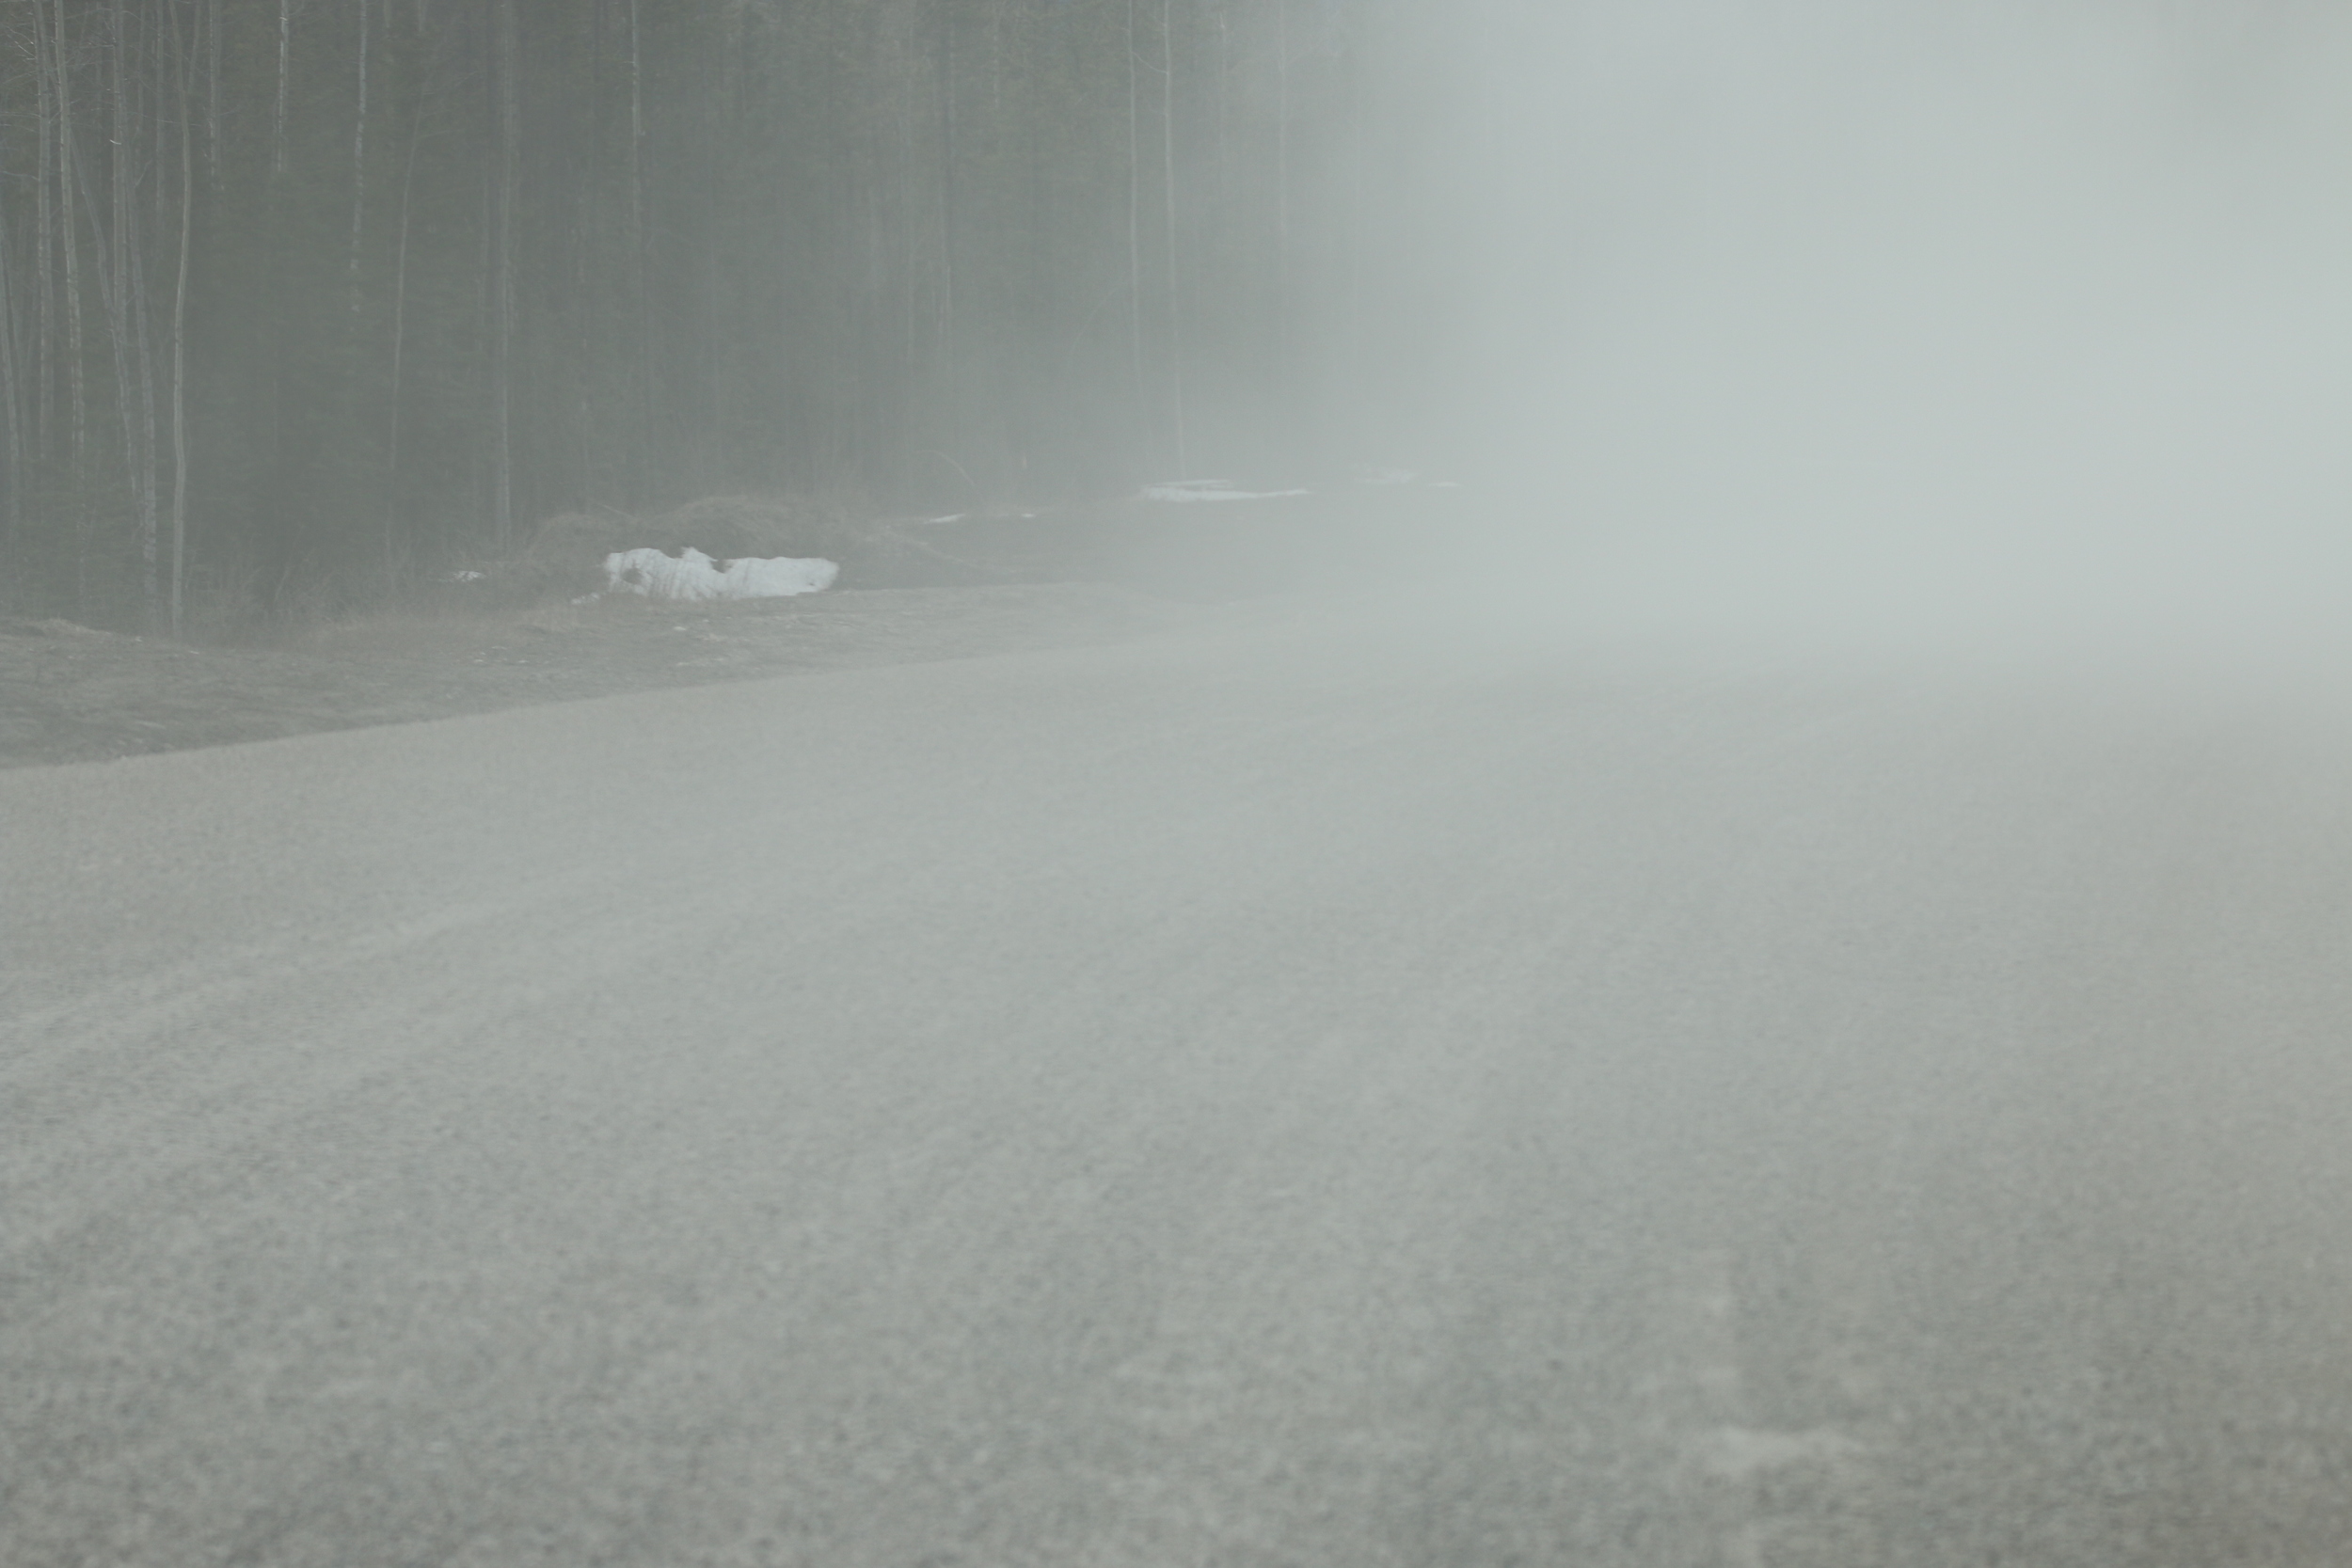 Adverse driving conditions on the Alaska Hwy